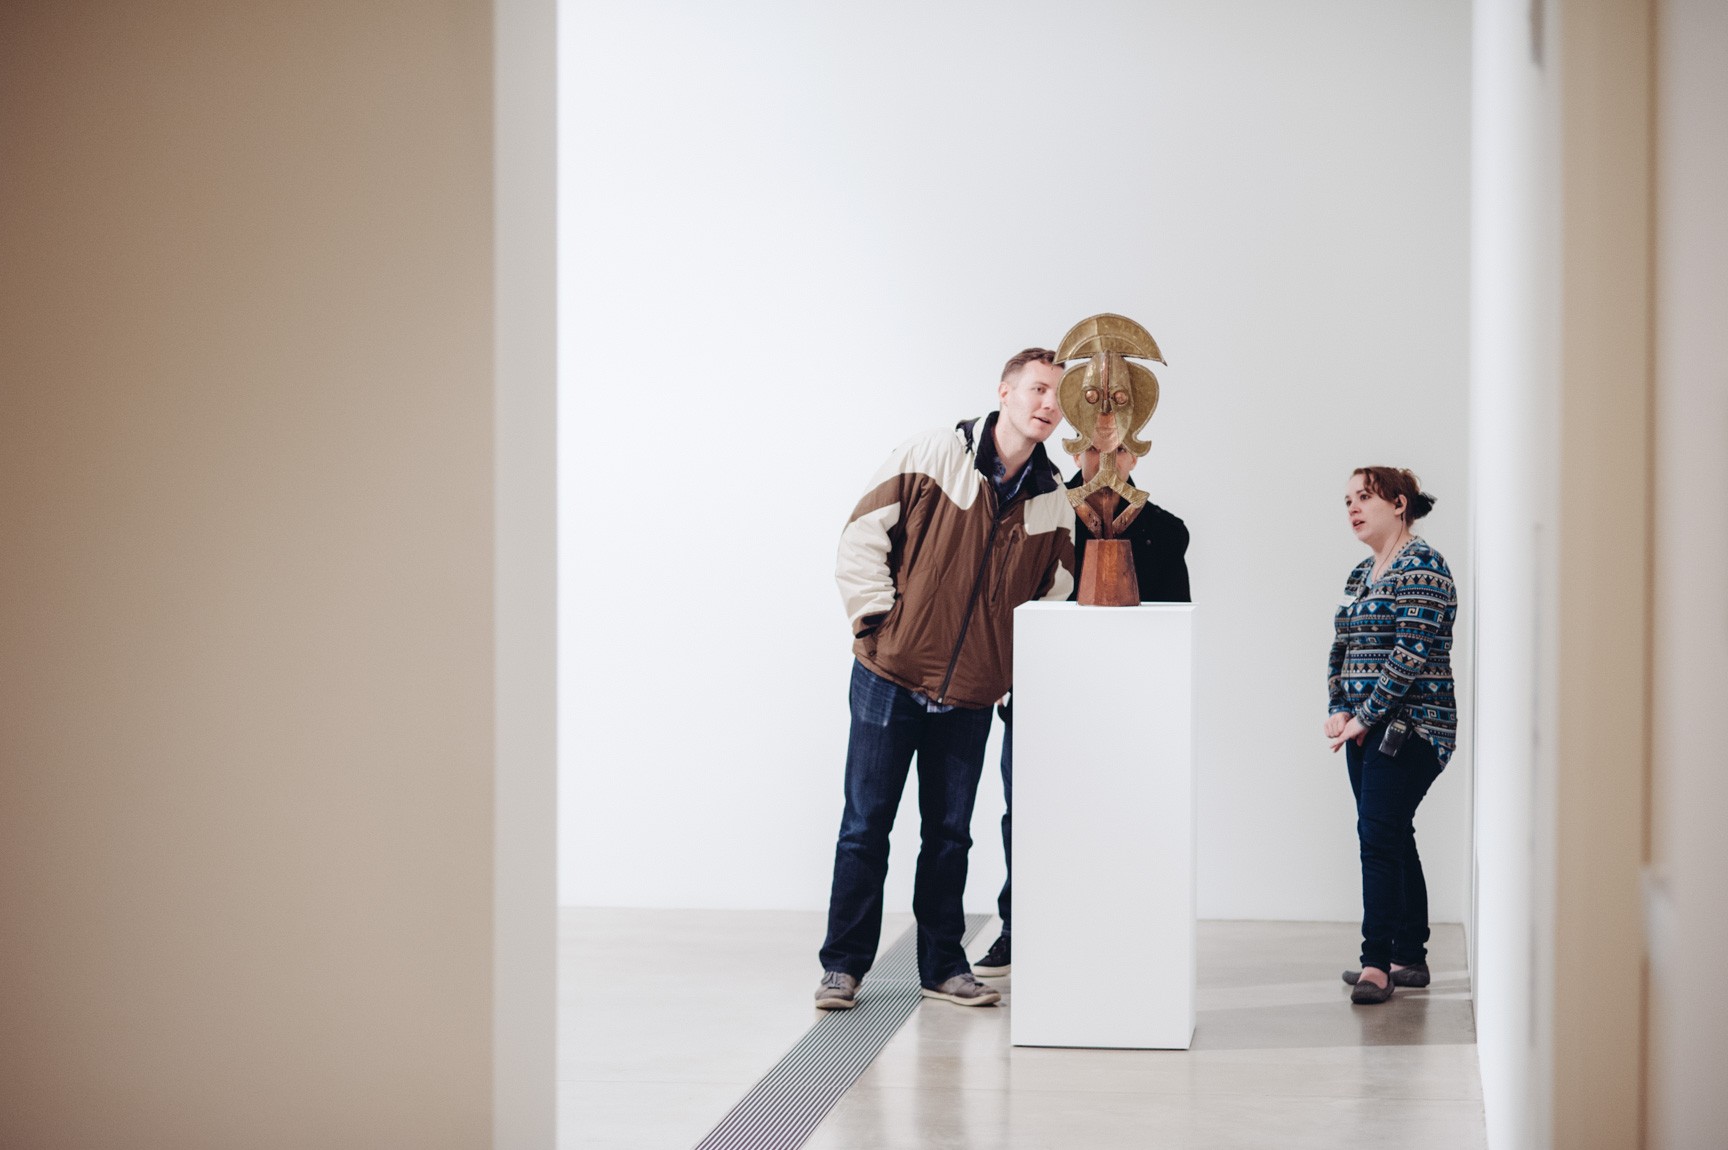 Two visitors admire an African sculpture as a gallery attendant watches over them.